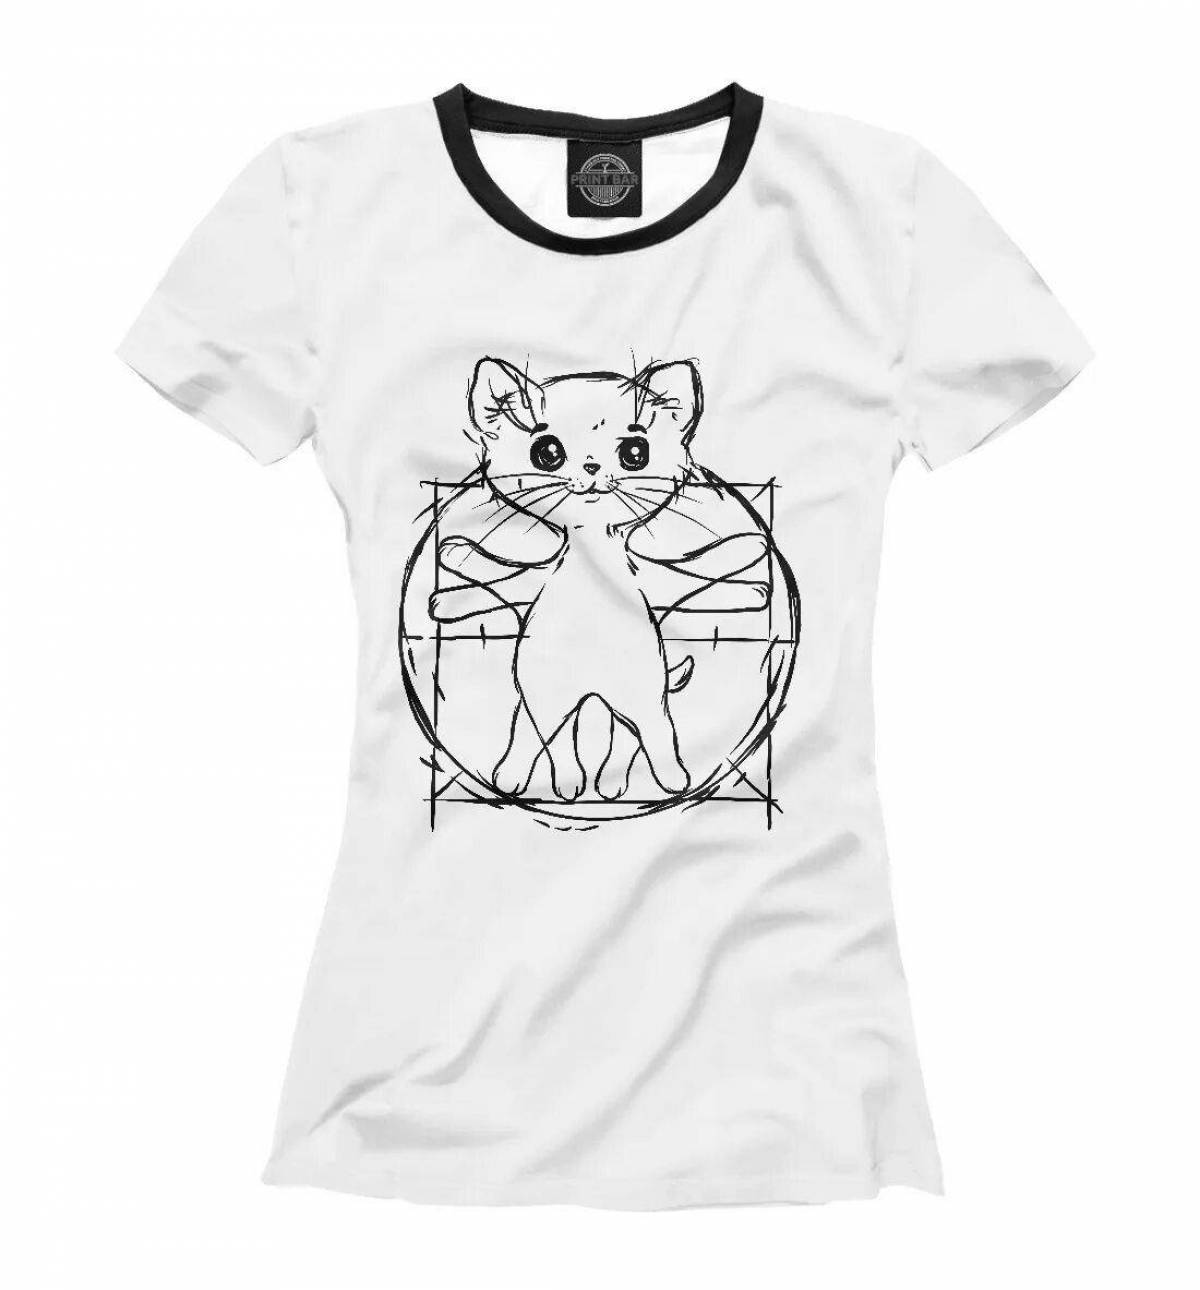 Coloring t-shirt with bright kitten